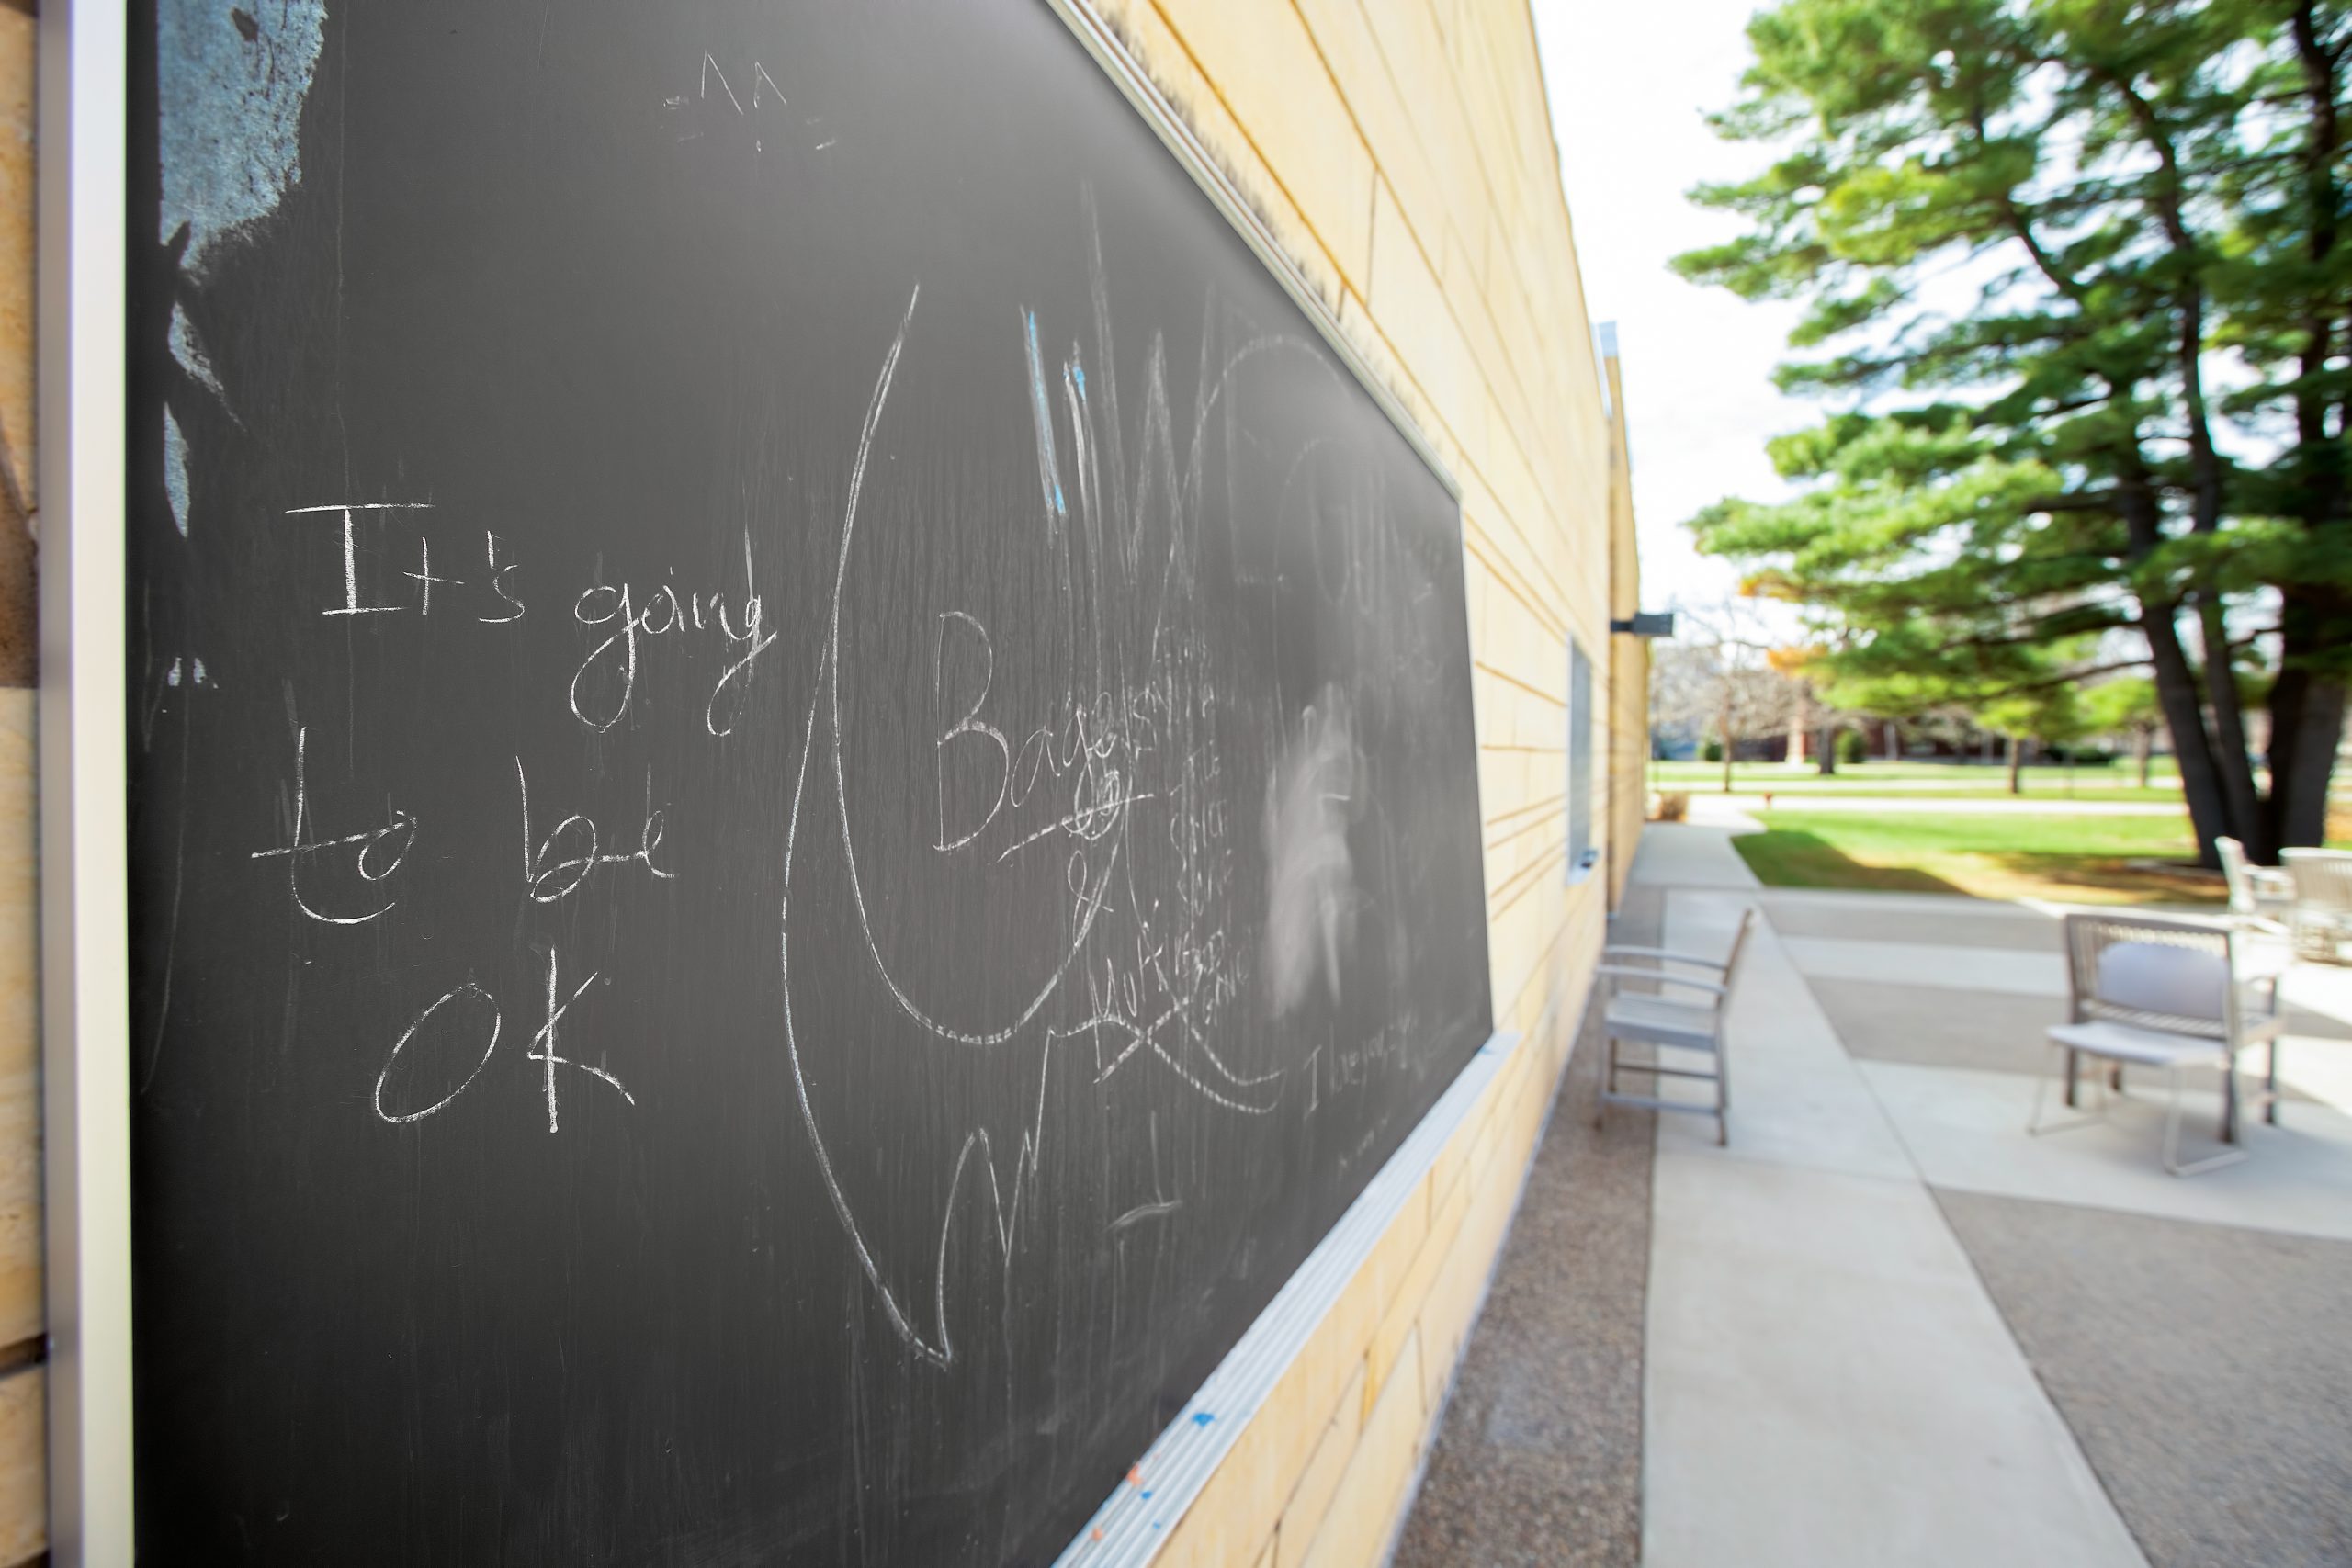 Carleton’s outdoor chalkboards are covered with messages of support.